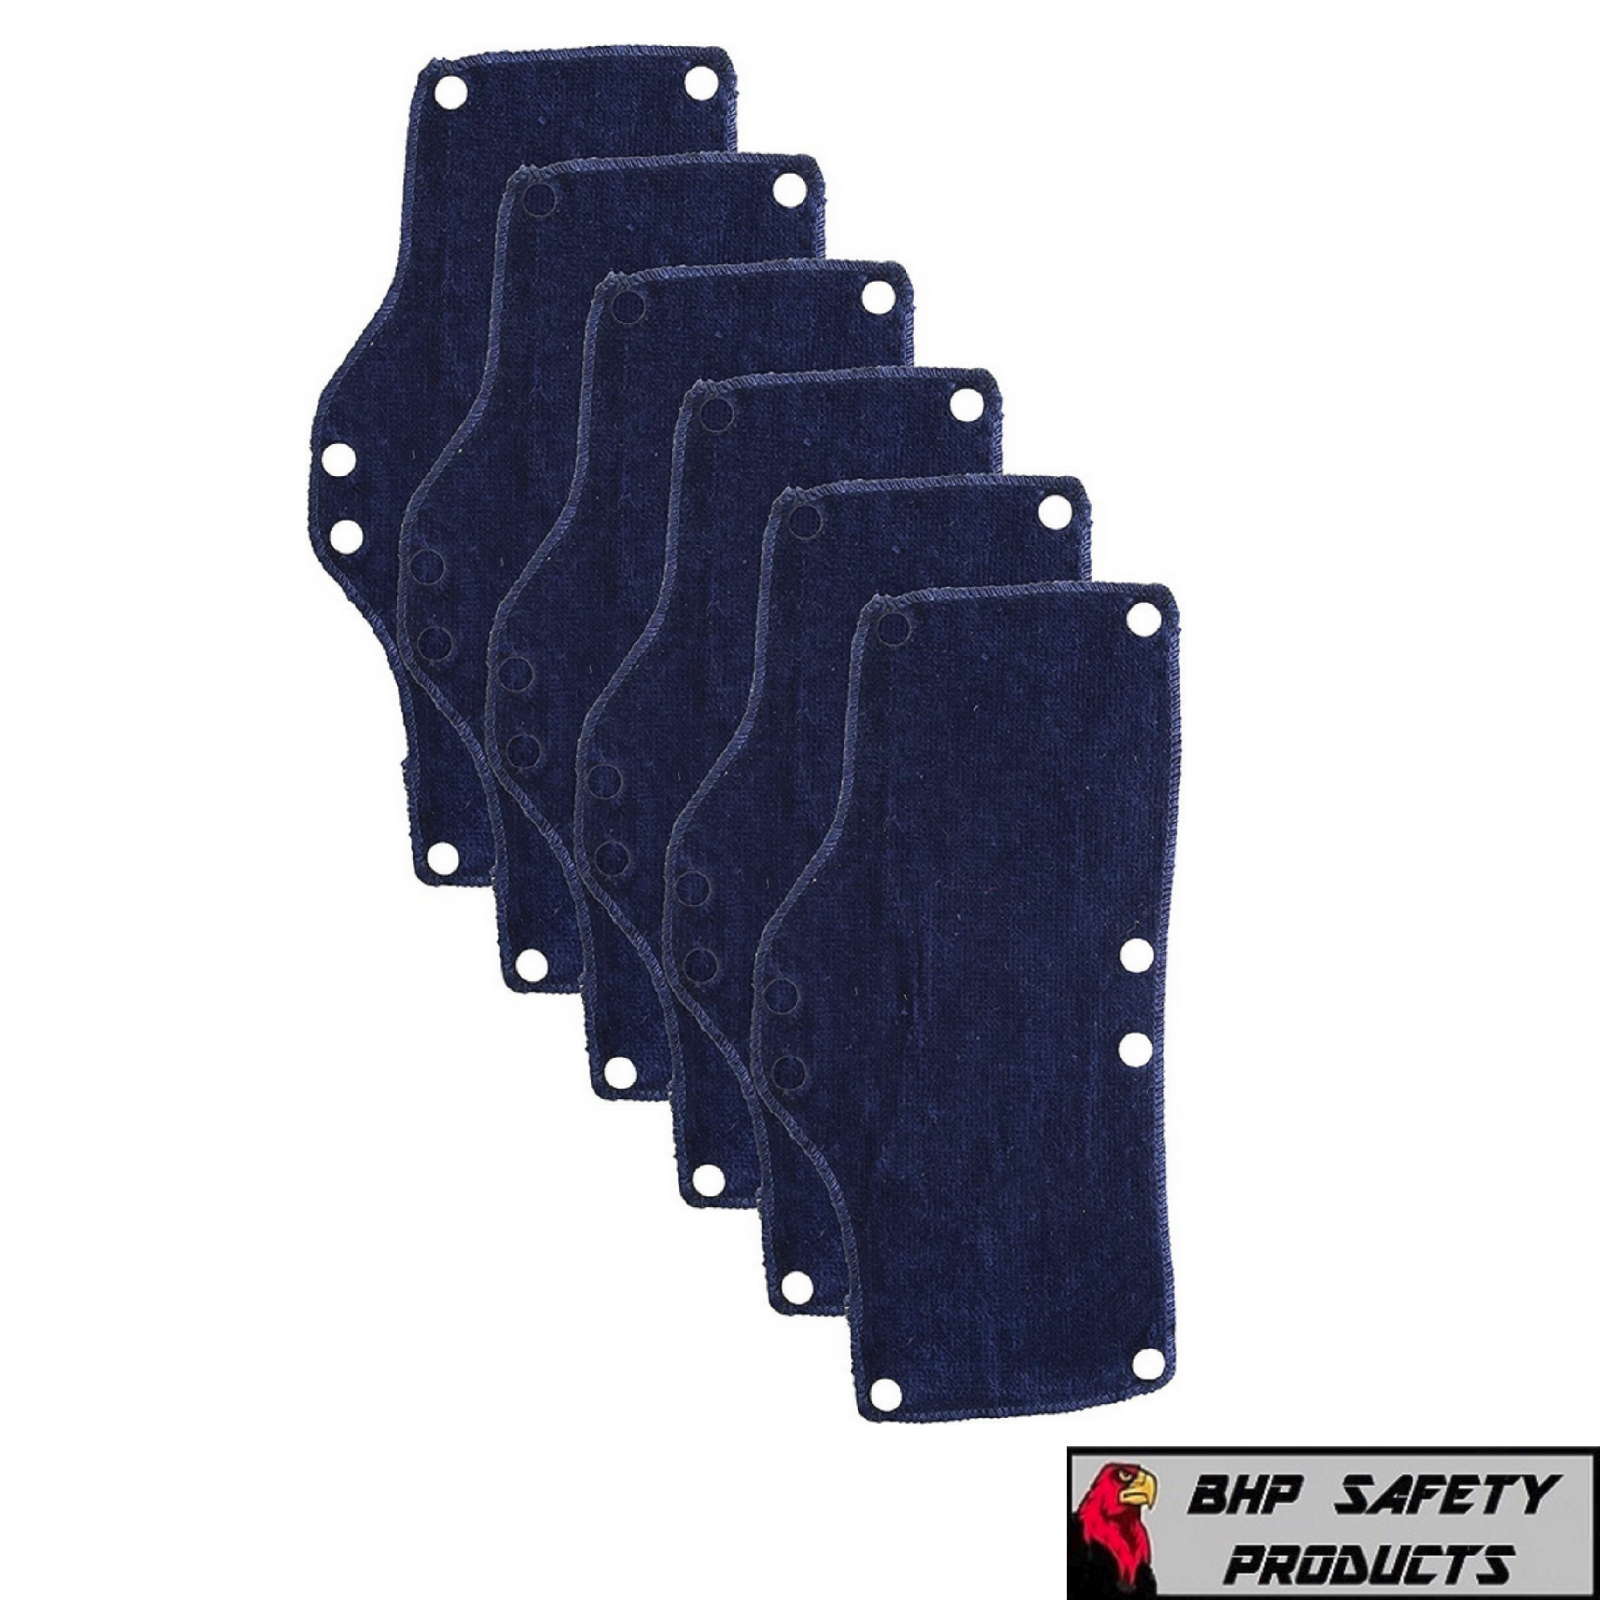 Occunomix 870 Terry Cloth Snap On Navy Hard Hat Sweat Bands Contruction (6 Pack)